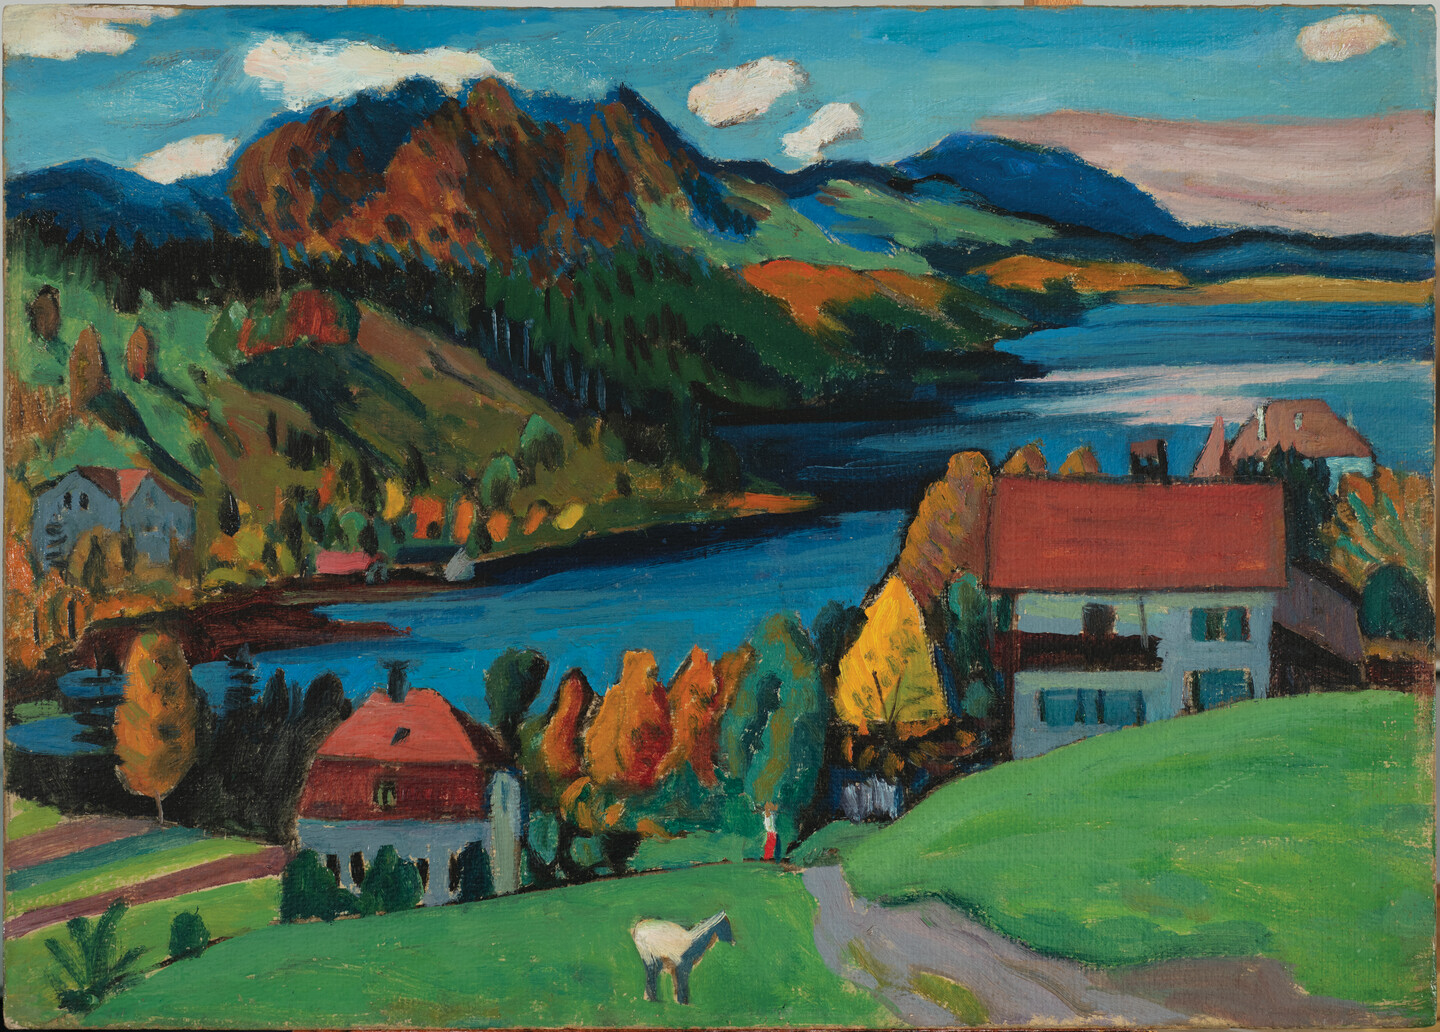 An Expressionist oil painting depicting a large lake nestled into a mountainous landscape. There is a forest of trees with red, yellow, and orange leaves. On the far shore of the lake are houses and other buildings. In the foreground, a single sheep is grazing in front of two houses.